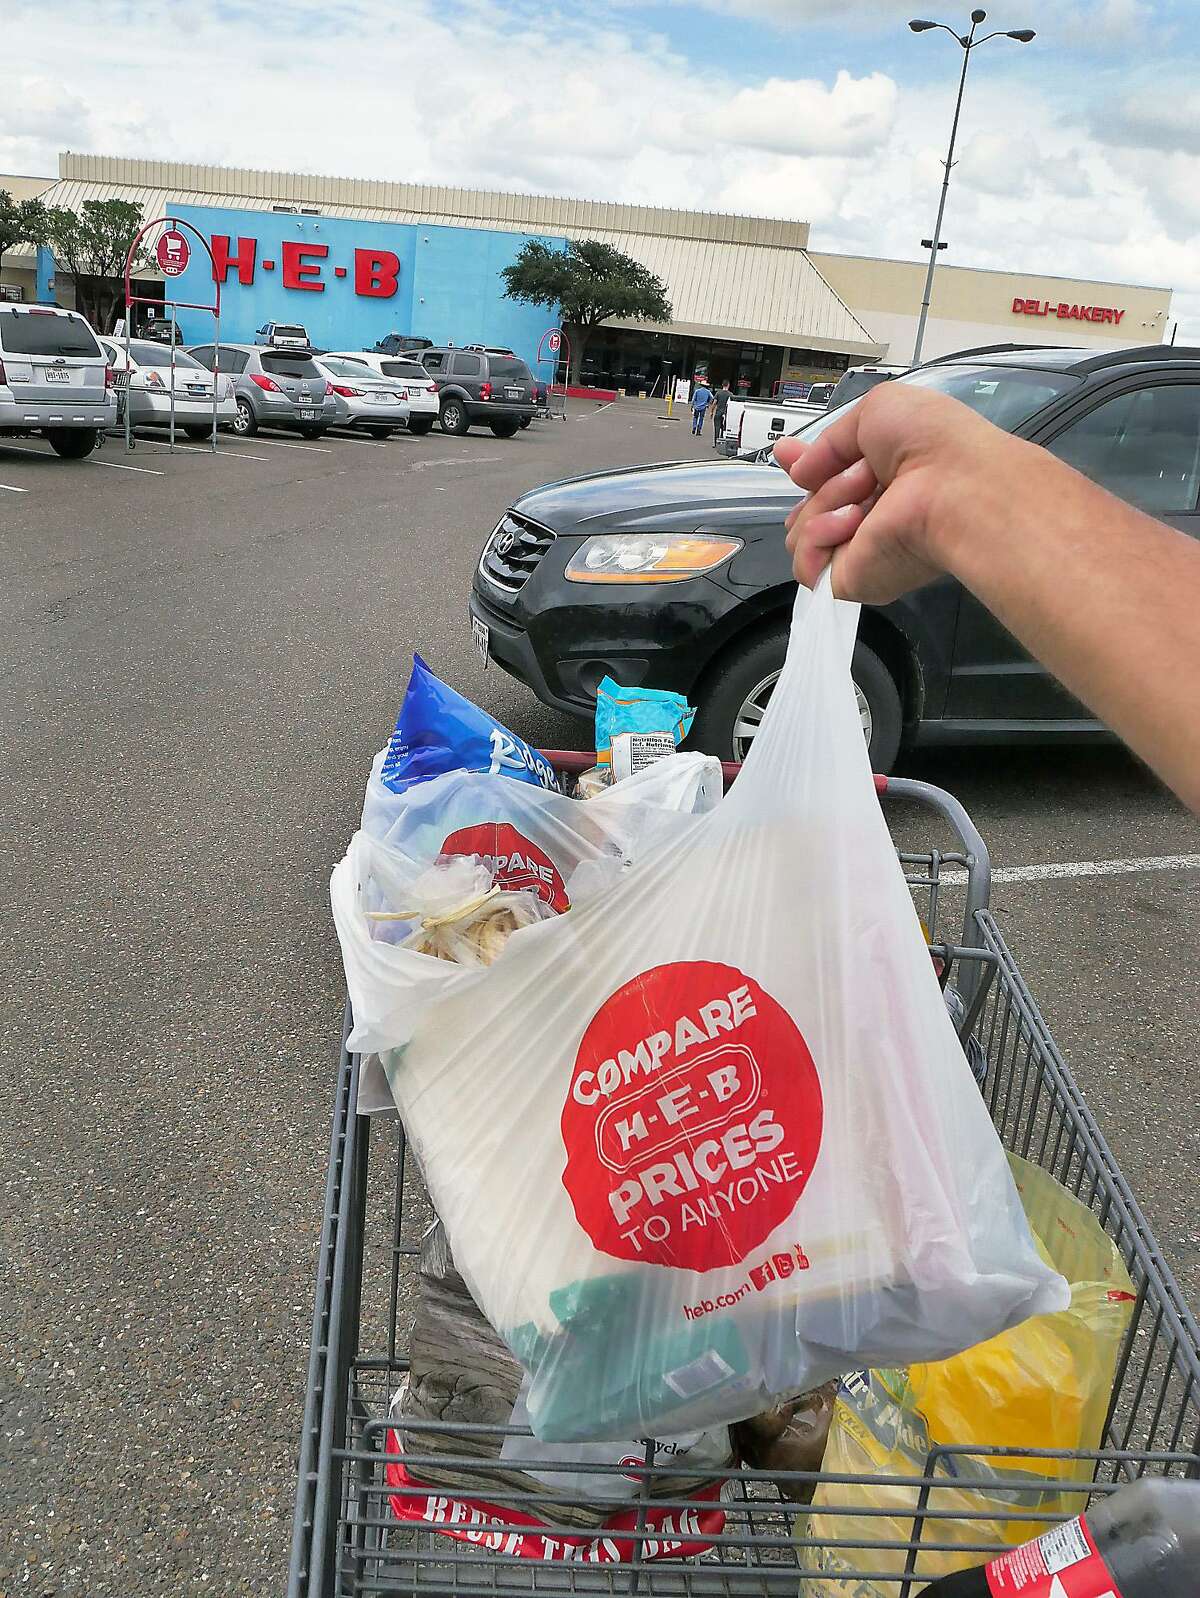 Report evaluates plastic bag recycling programs at retail